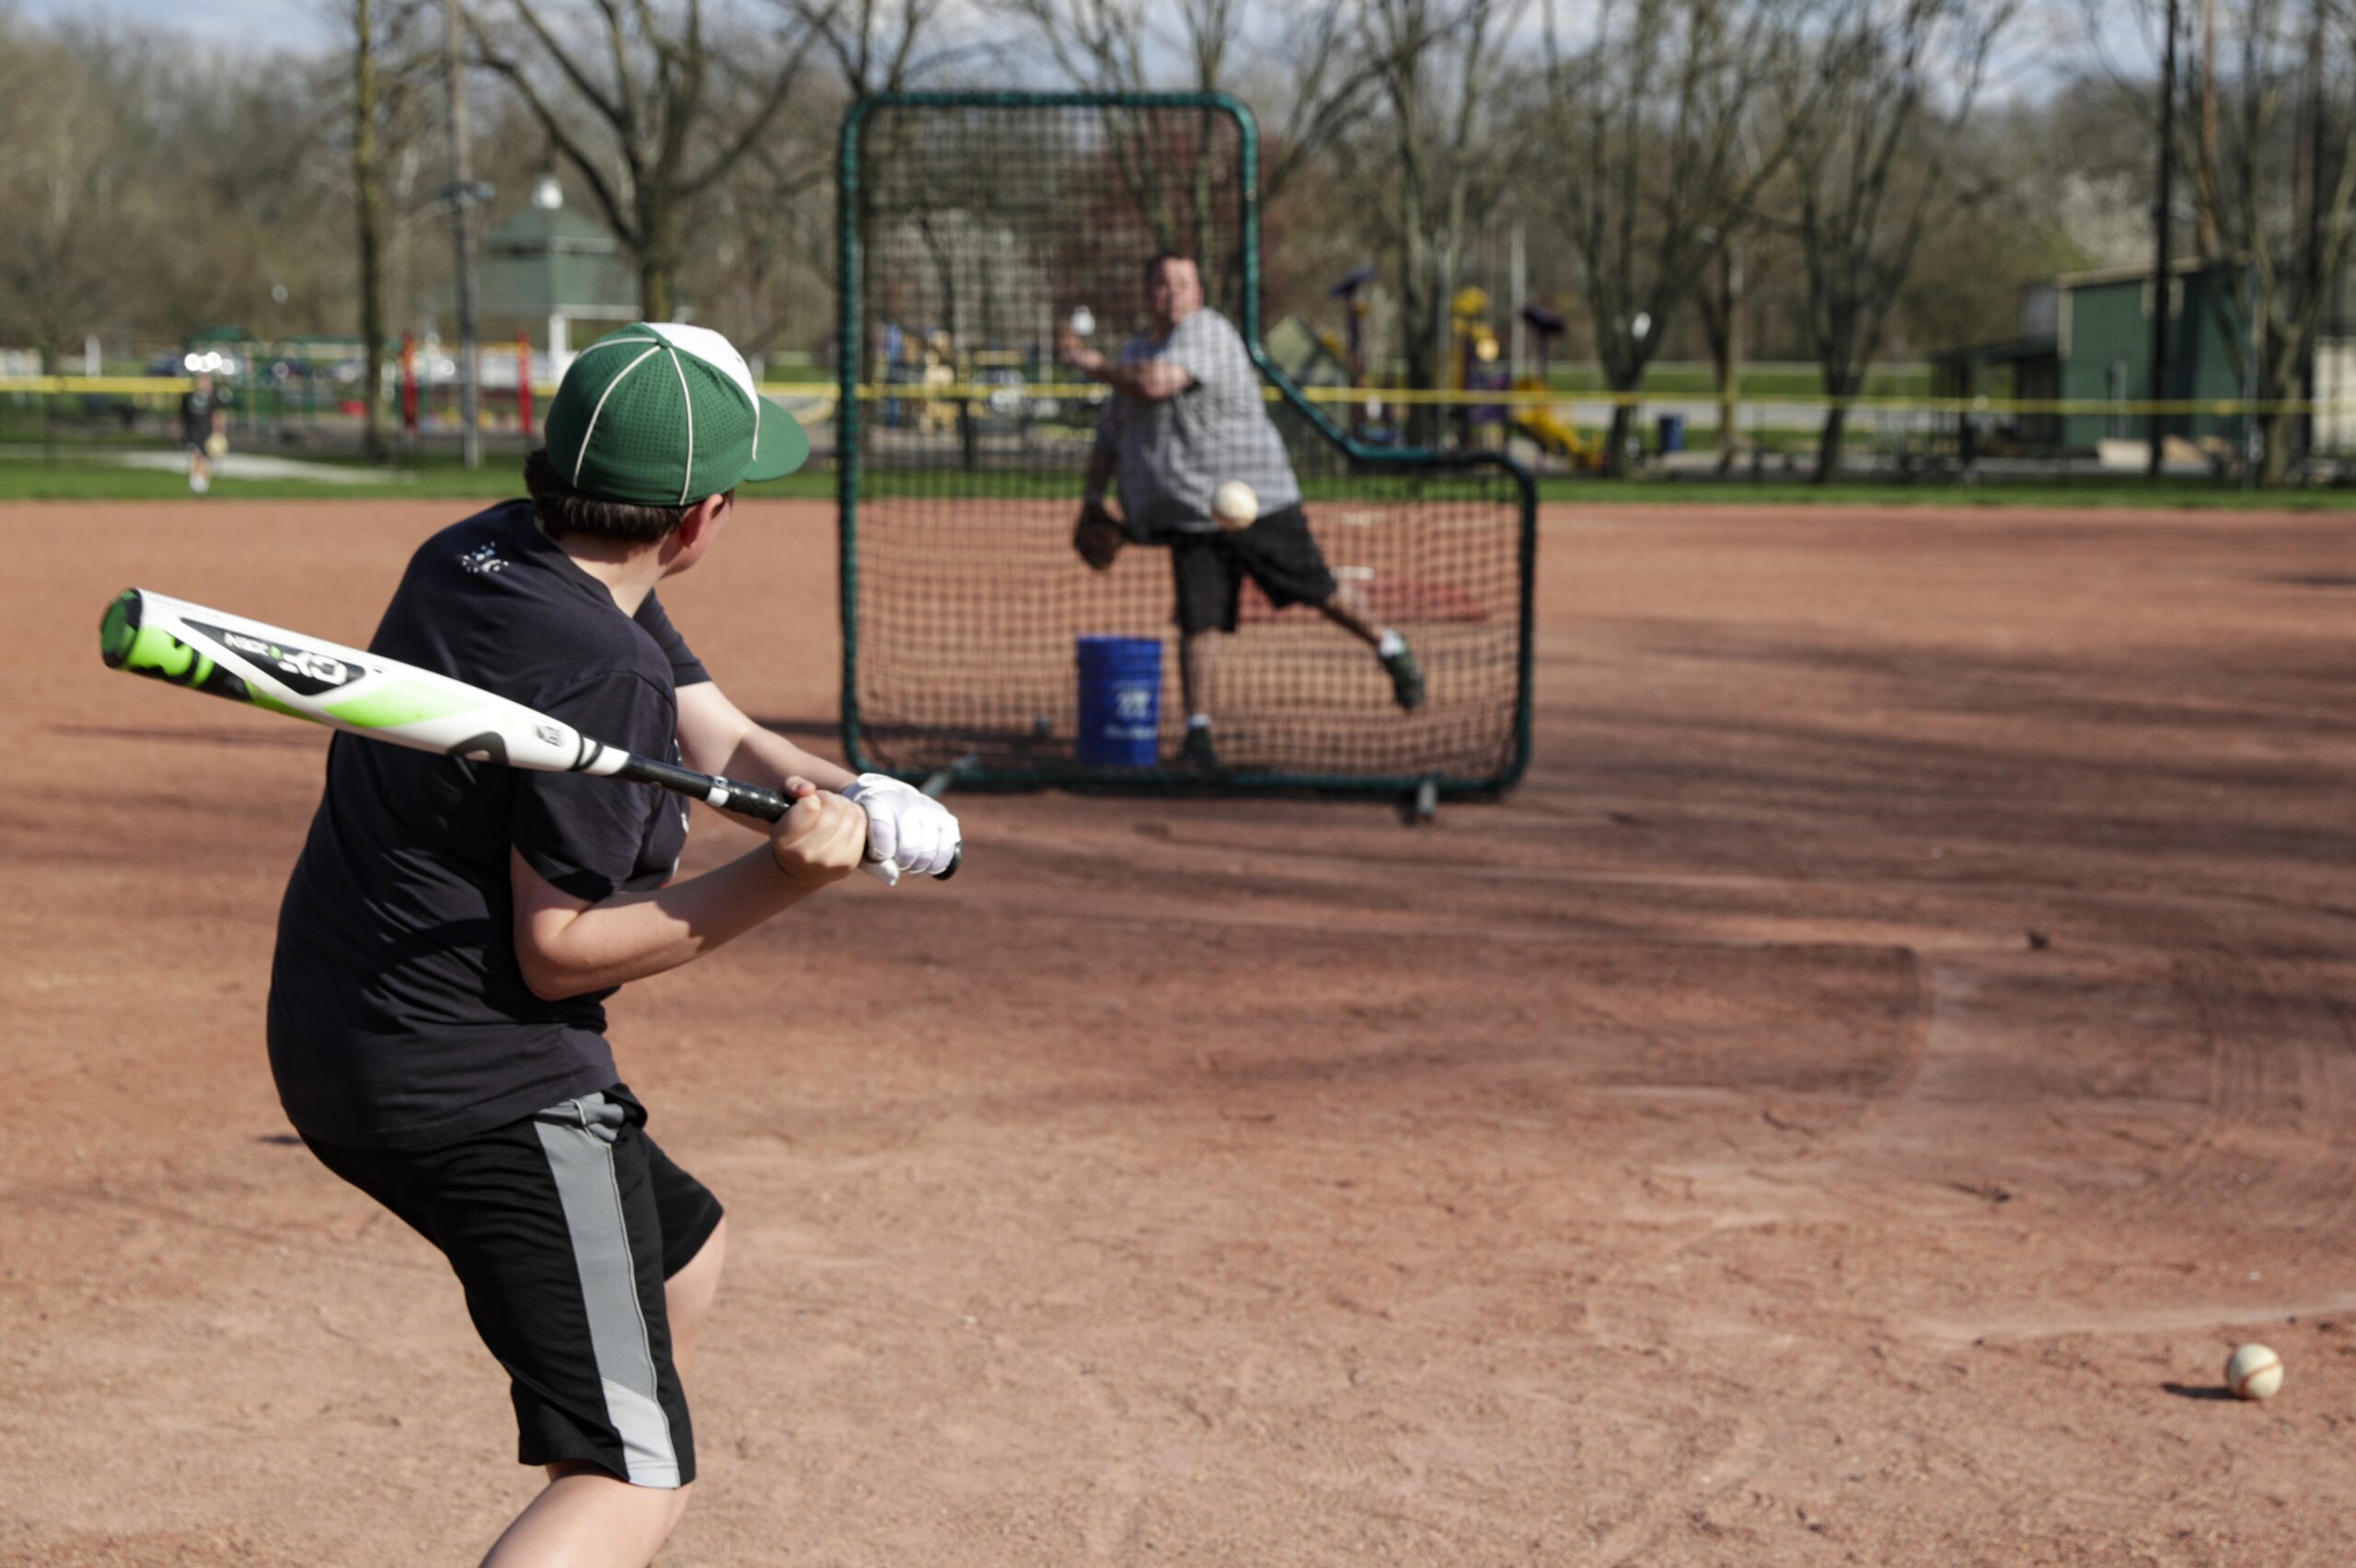 A father and son take batting practice during the coronavirus pandemic